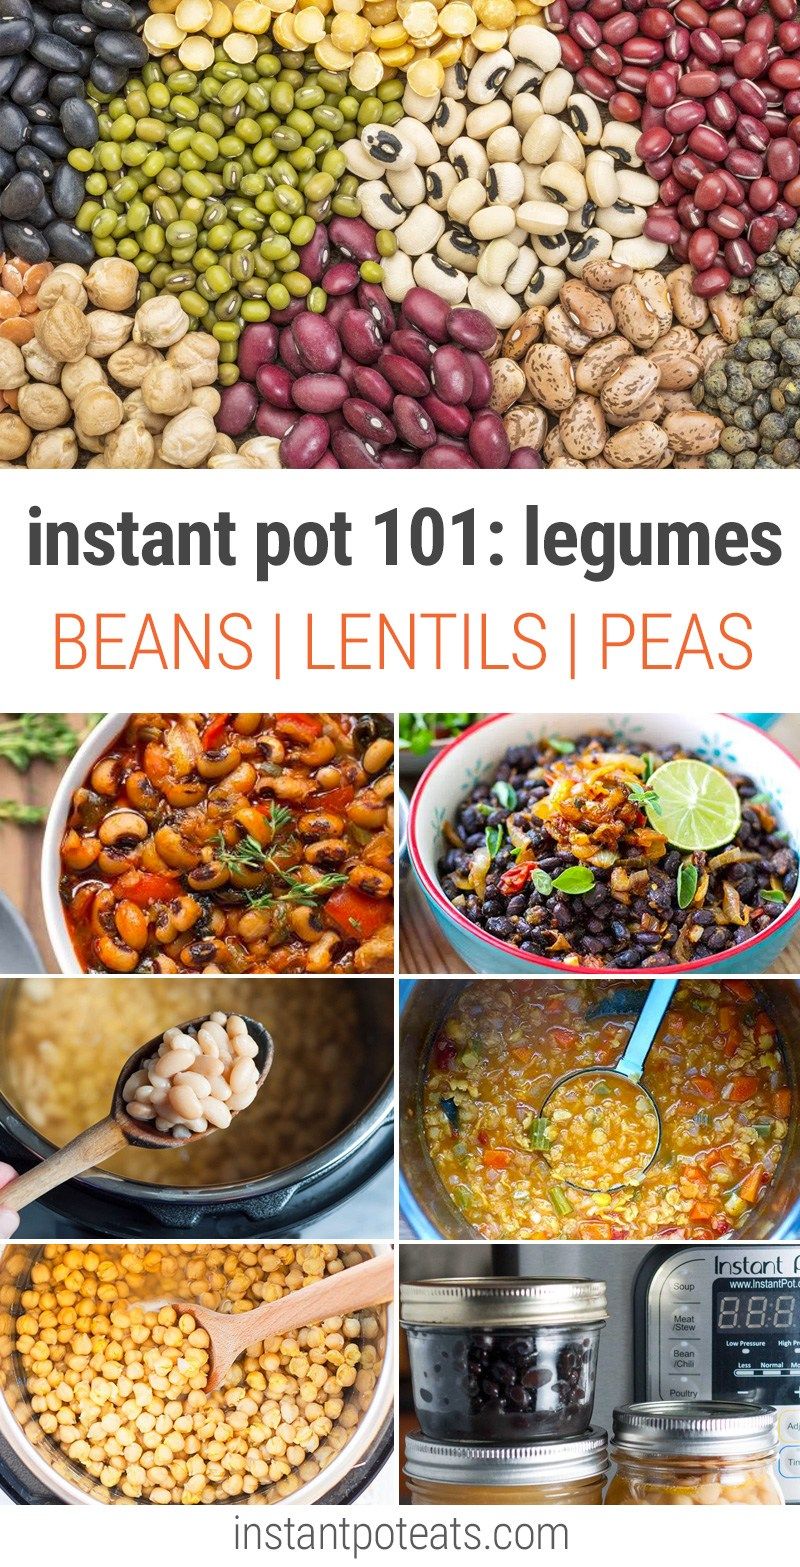 How Long To Cook Beans In Instant Pot